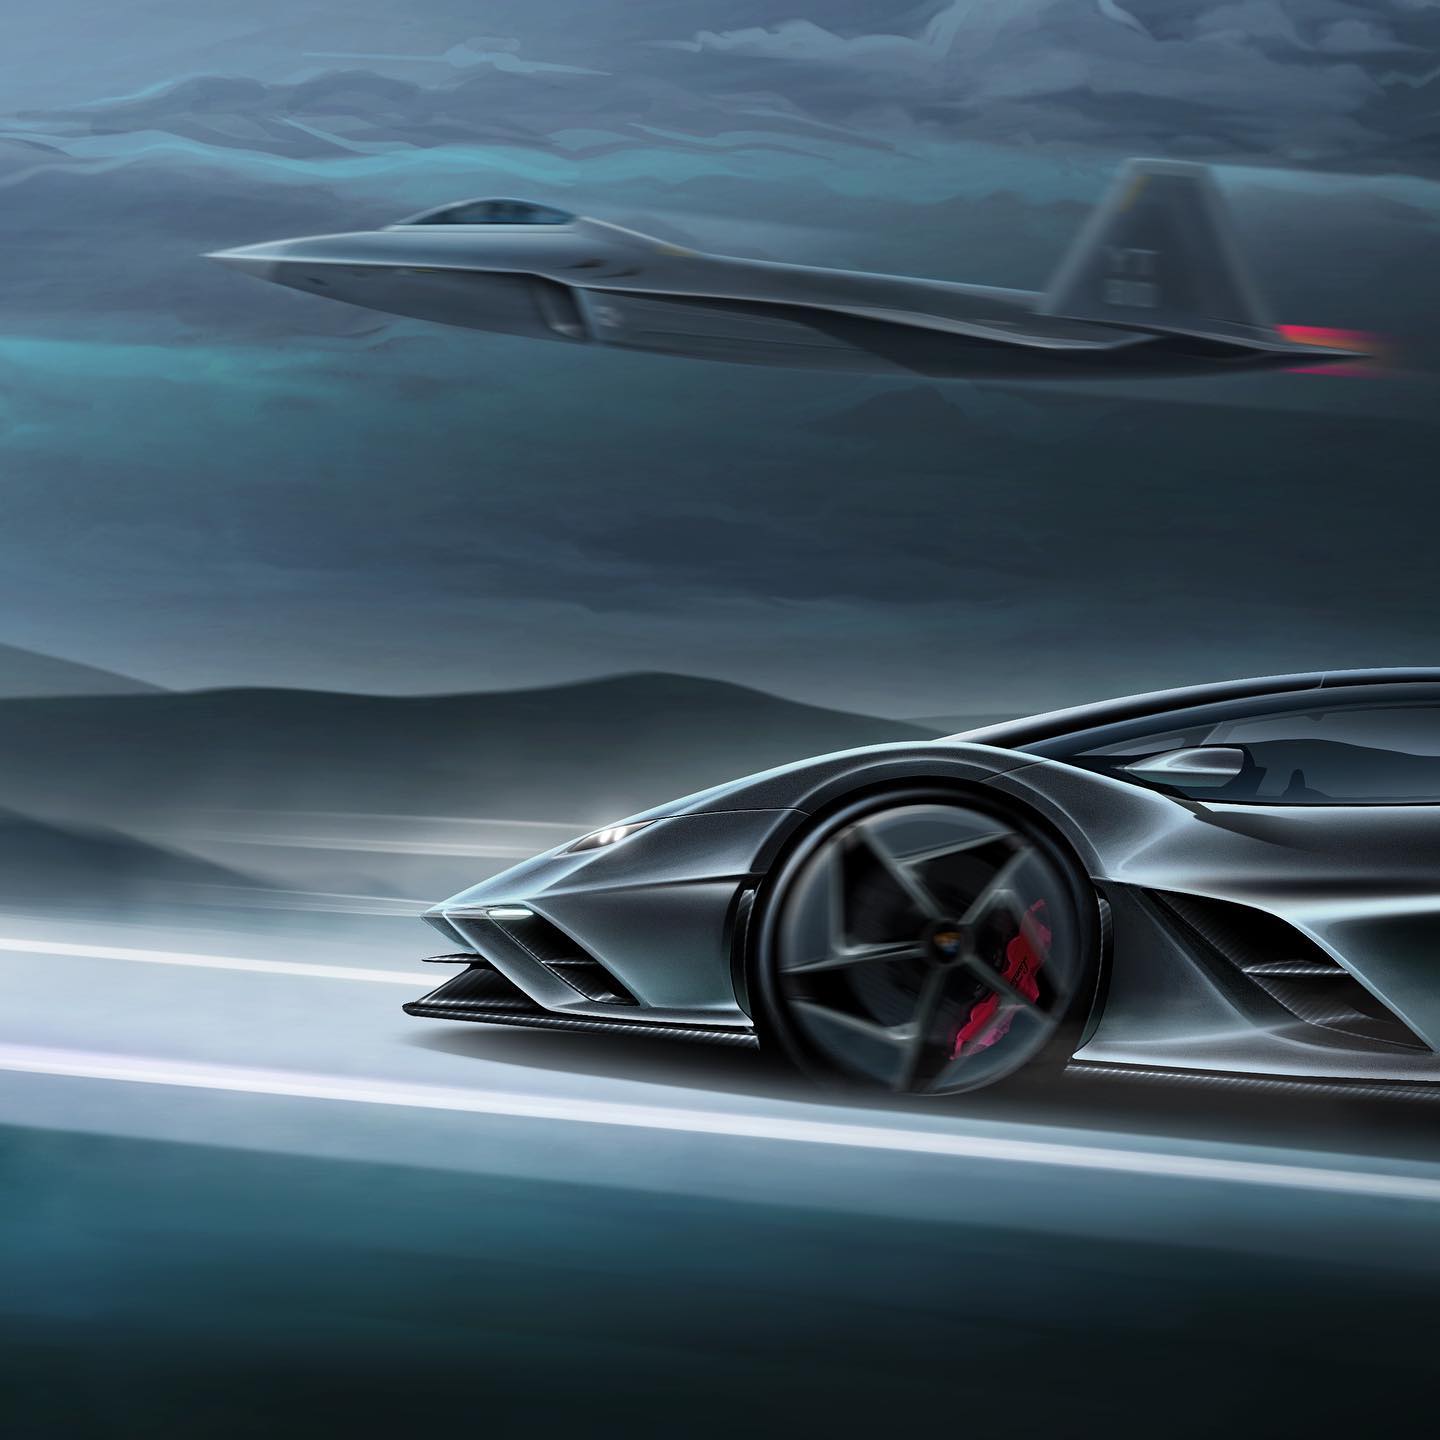 Lamborghini MVF22, a CGI Project Inspired by the F-22 Raptor, Might Come to  Life - autoevolution